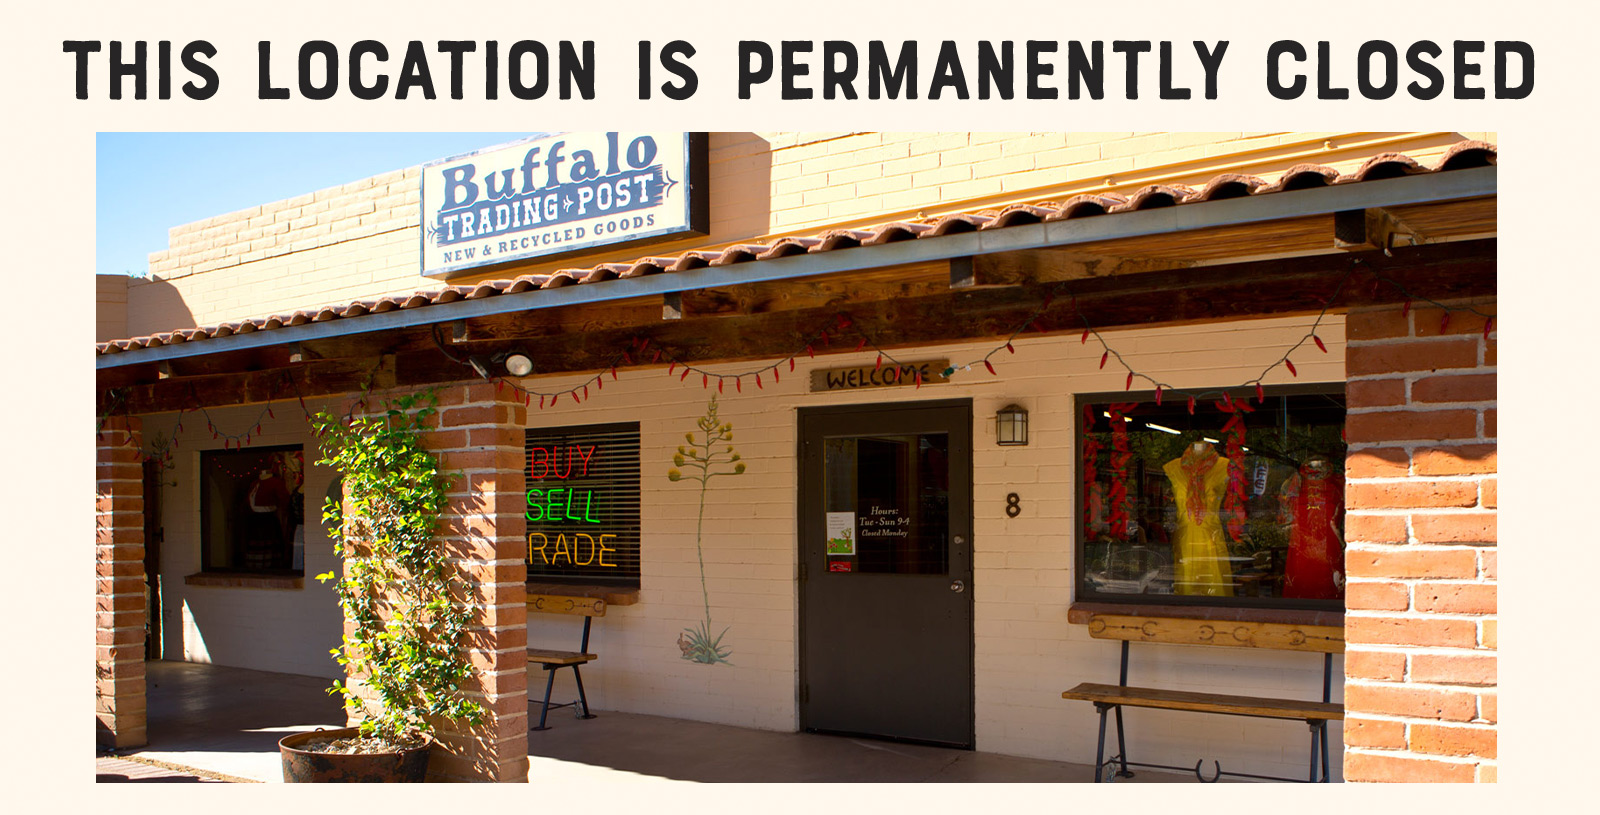 Buffalo Trading Post Storefront - This Location Is Permanently Closed